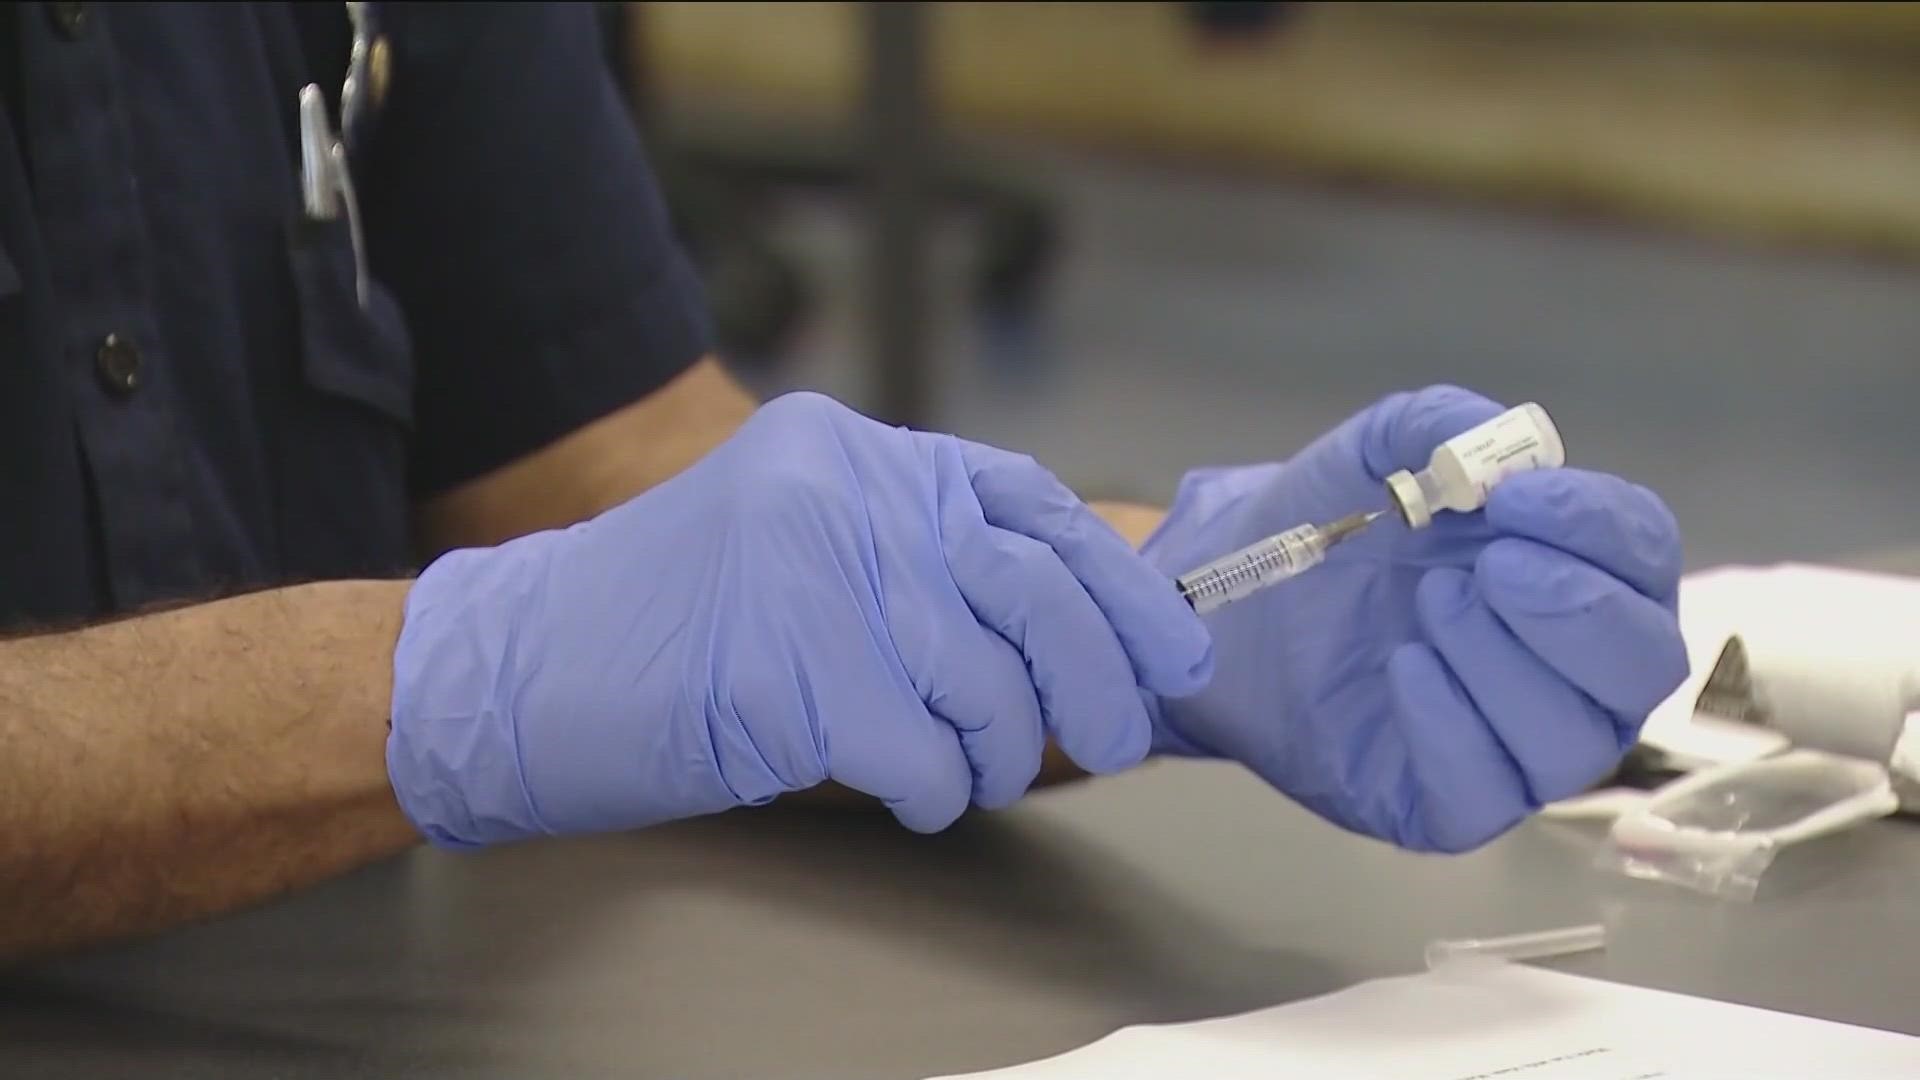 The City of San Diego's vaccine mandate for its employees will end on March 9.